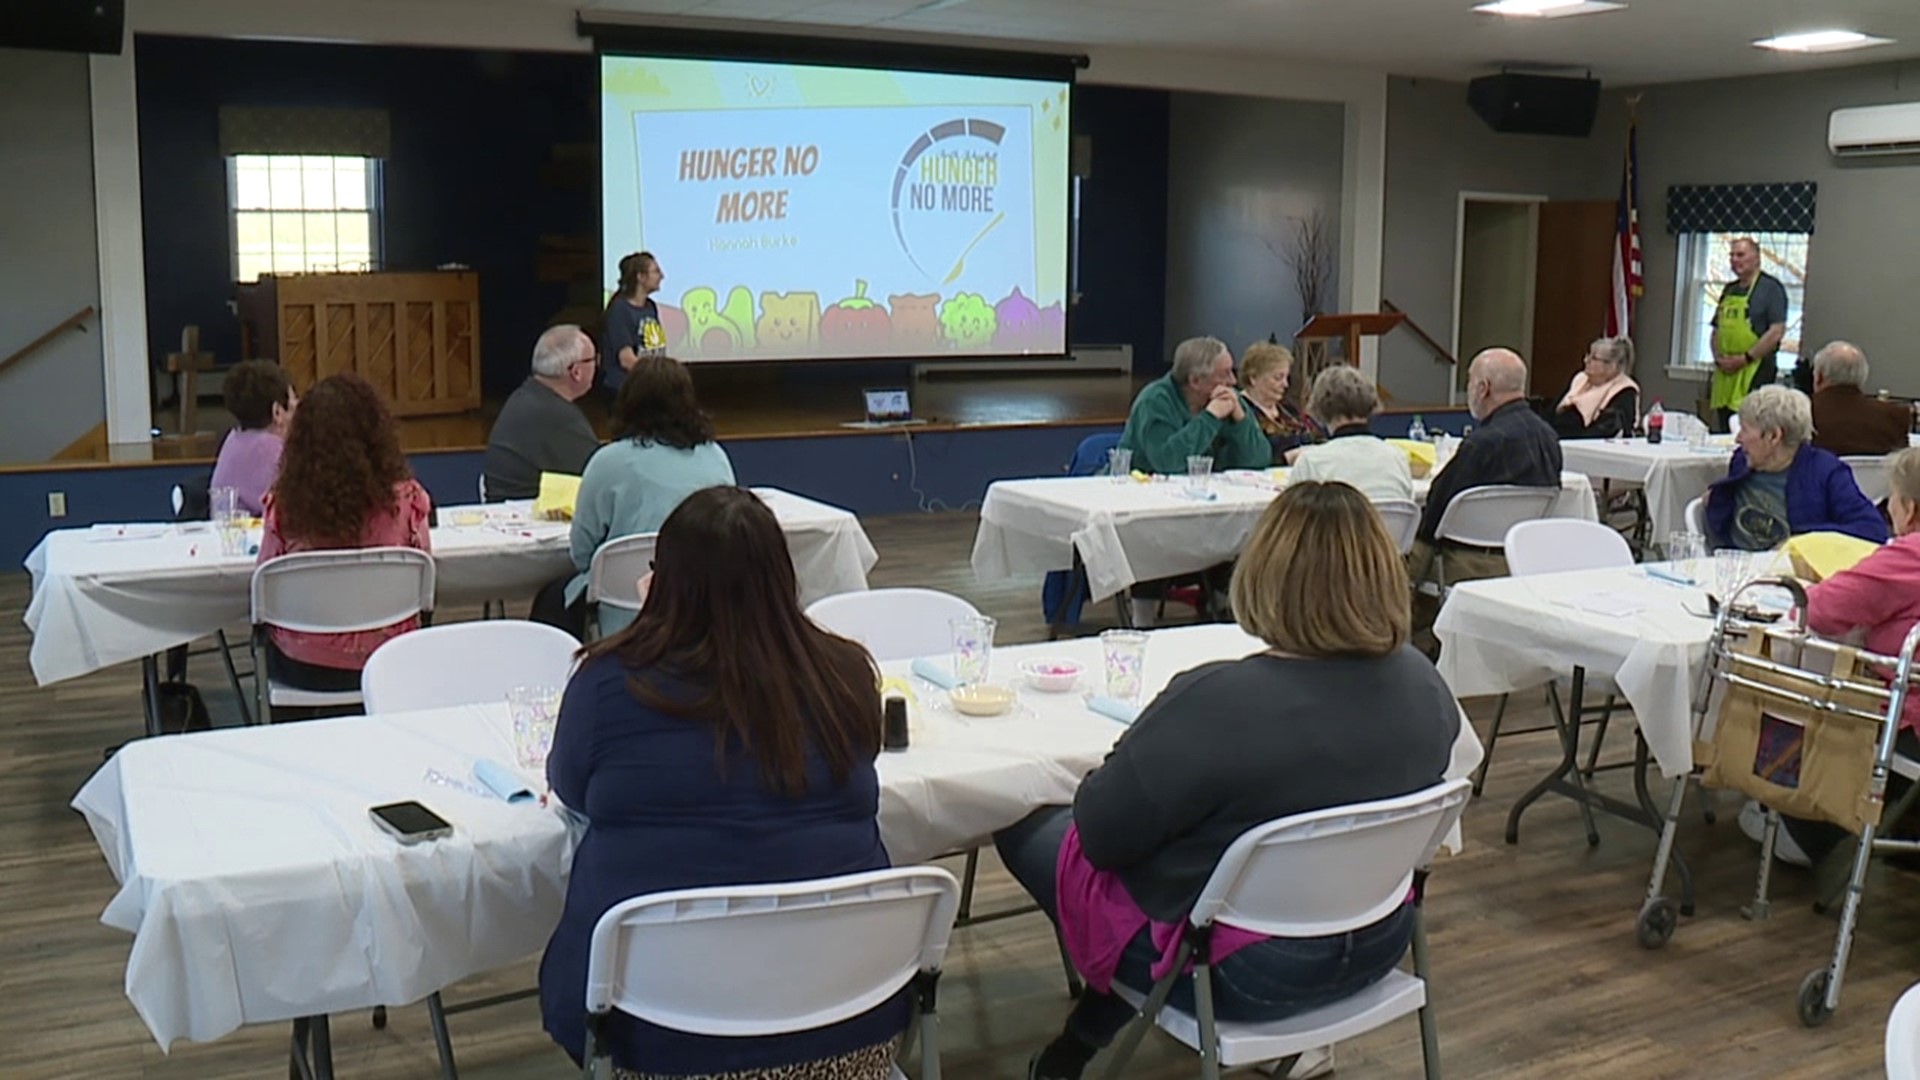 A dinner was held in Schuylkill Haven Saturday night as a way to bring awareness to food insecurity in the county.